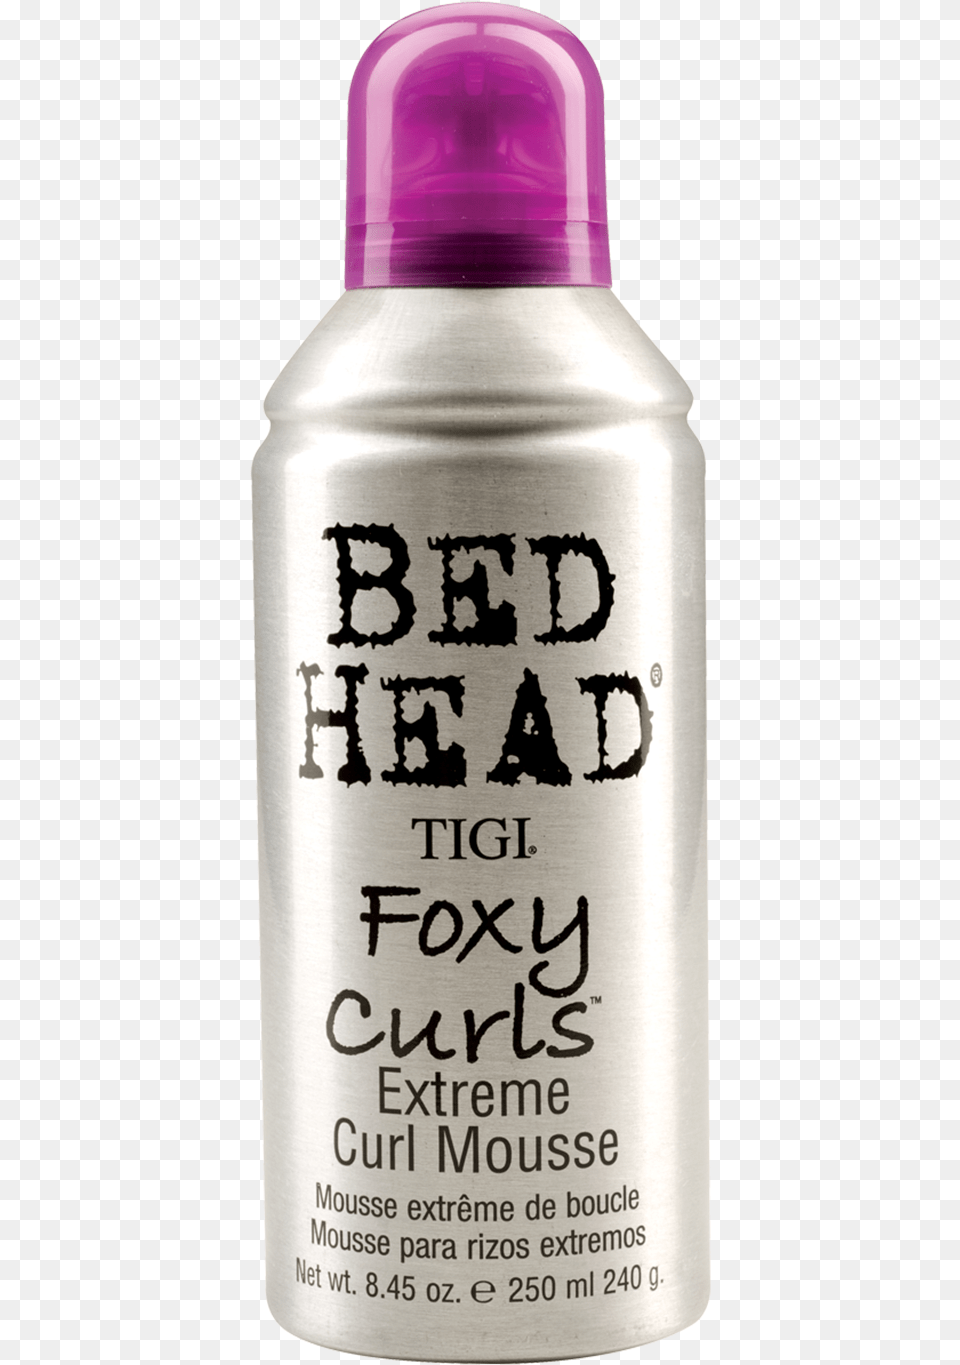 Foxy Curls Extreme Curl Mousse 6 Voc Tigi Cosmoprof Water Bottle, Cosmetics, Alcohol, Beer, Beverage Png